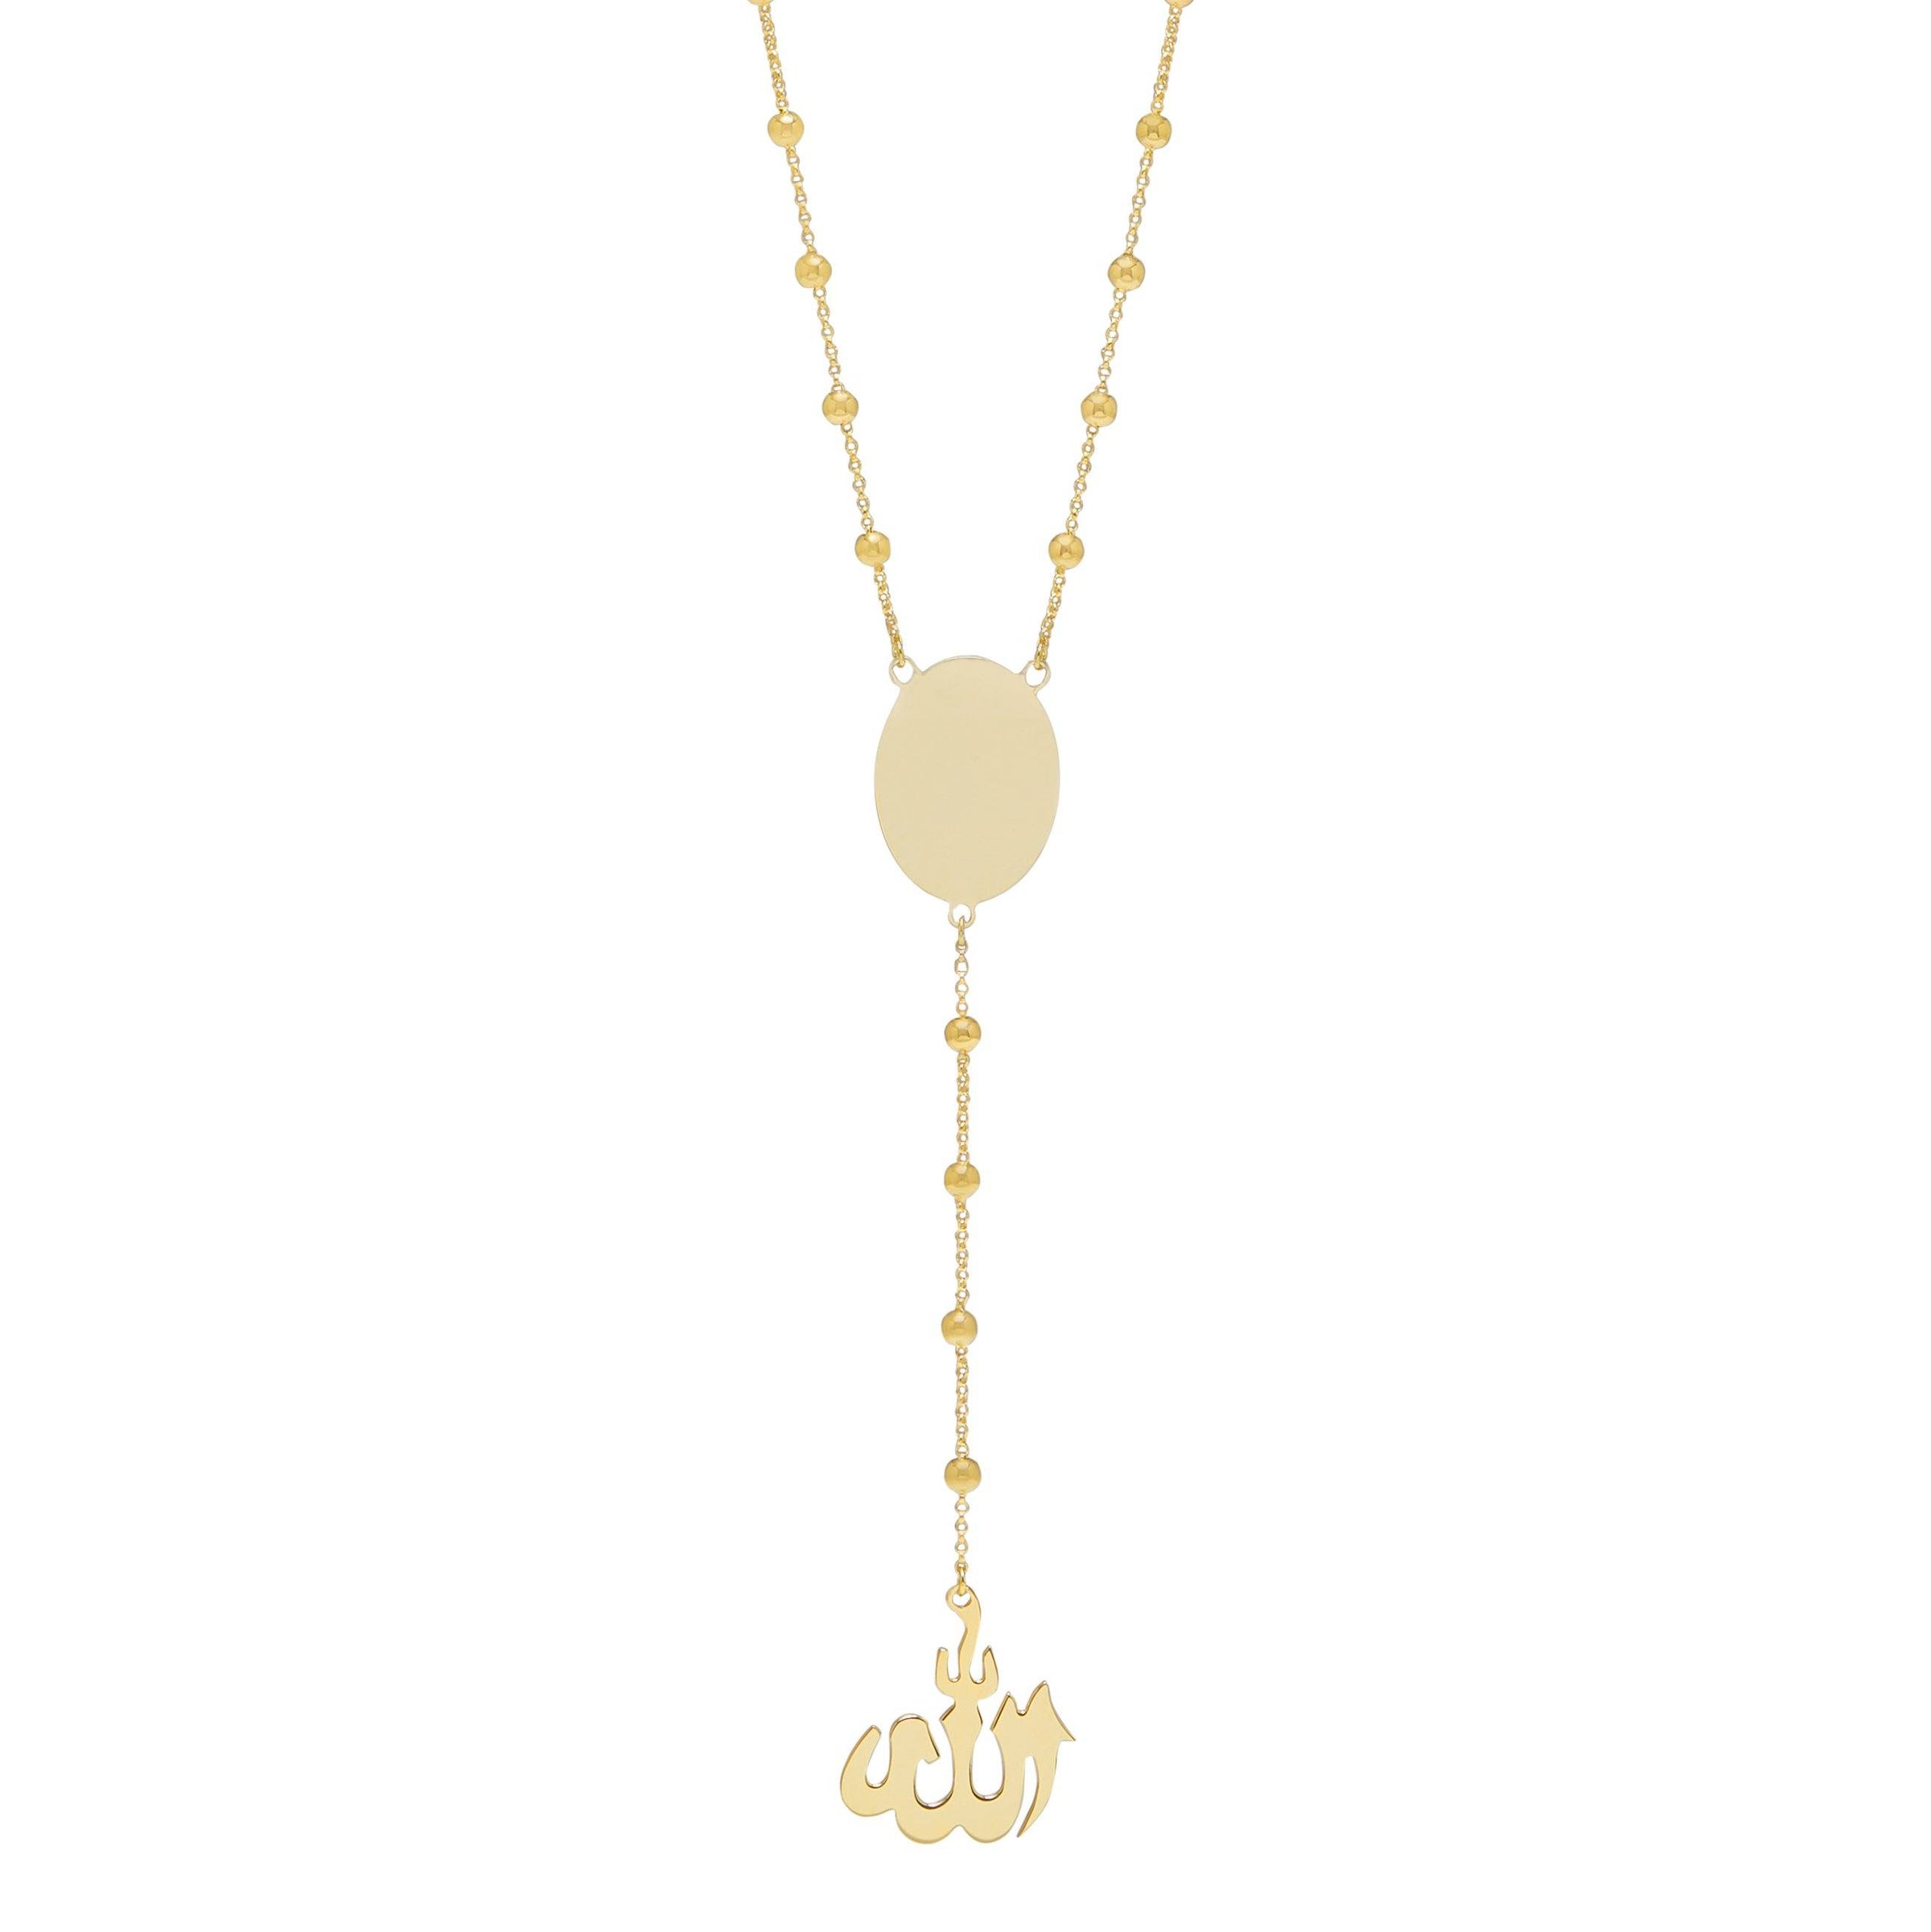 Islamic Rosary Necklace 50cm in 9ct Yellow Gold Silver Infused Necklaces Bevilles 